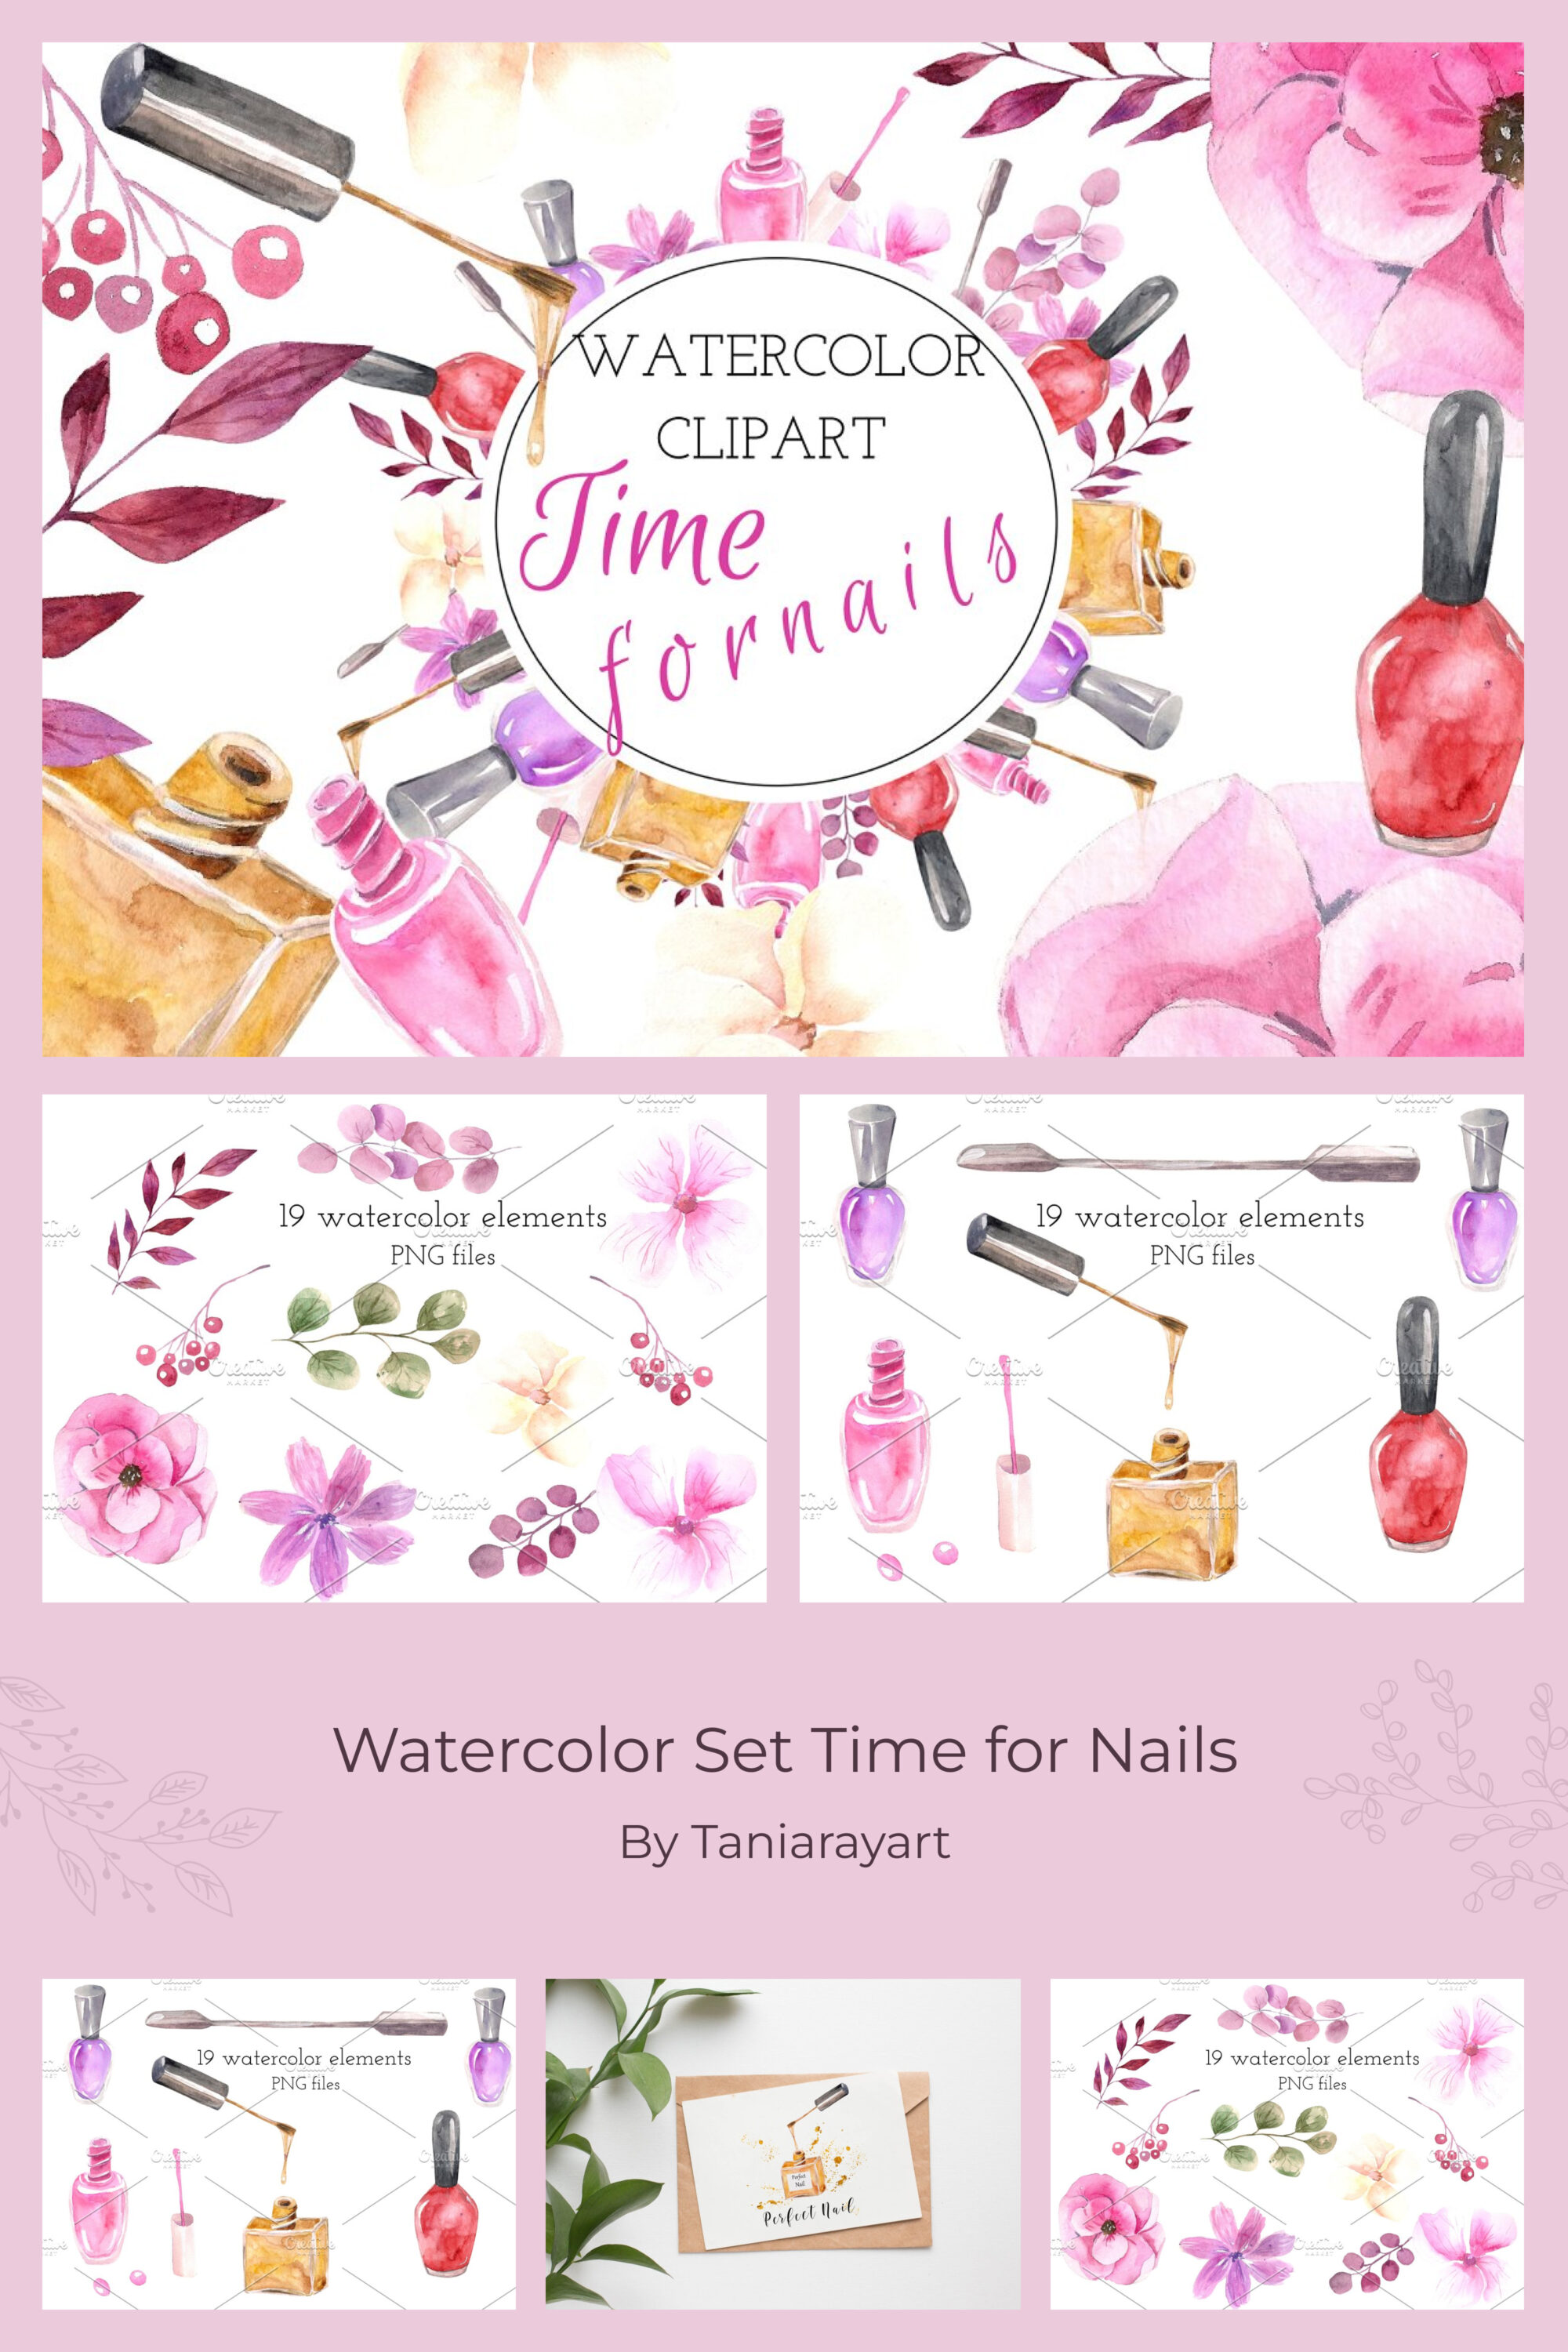 Watercolor set time for nails of pinterest.